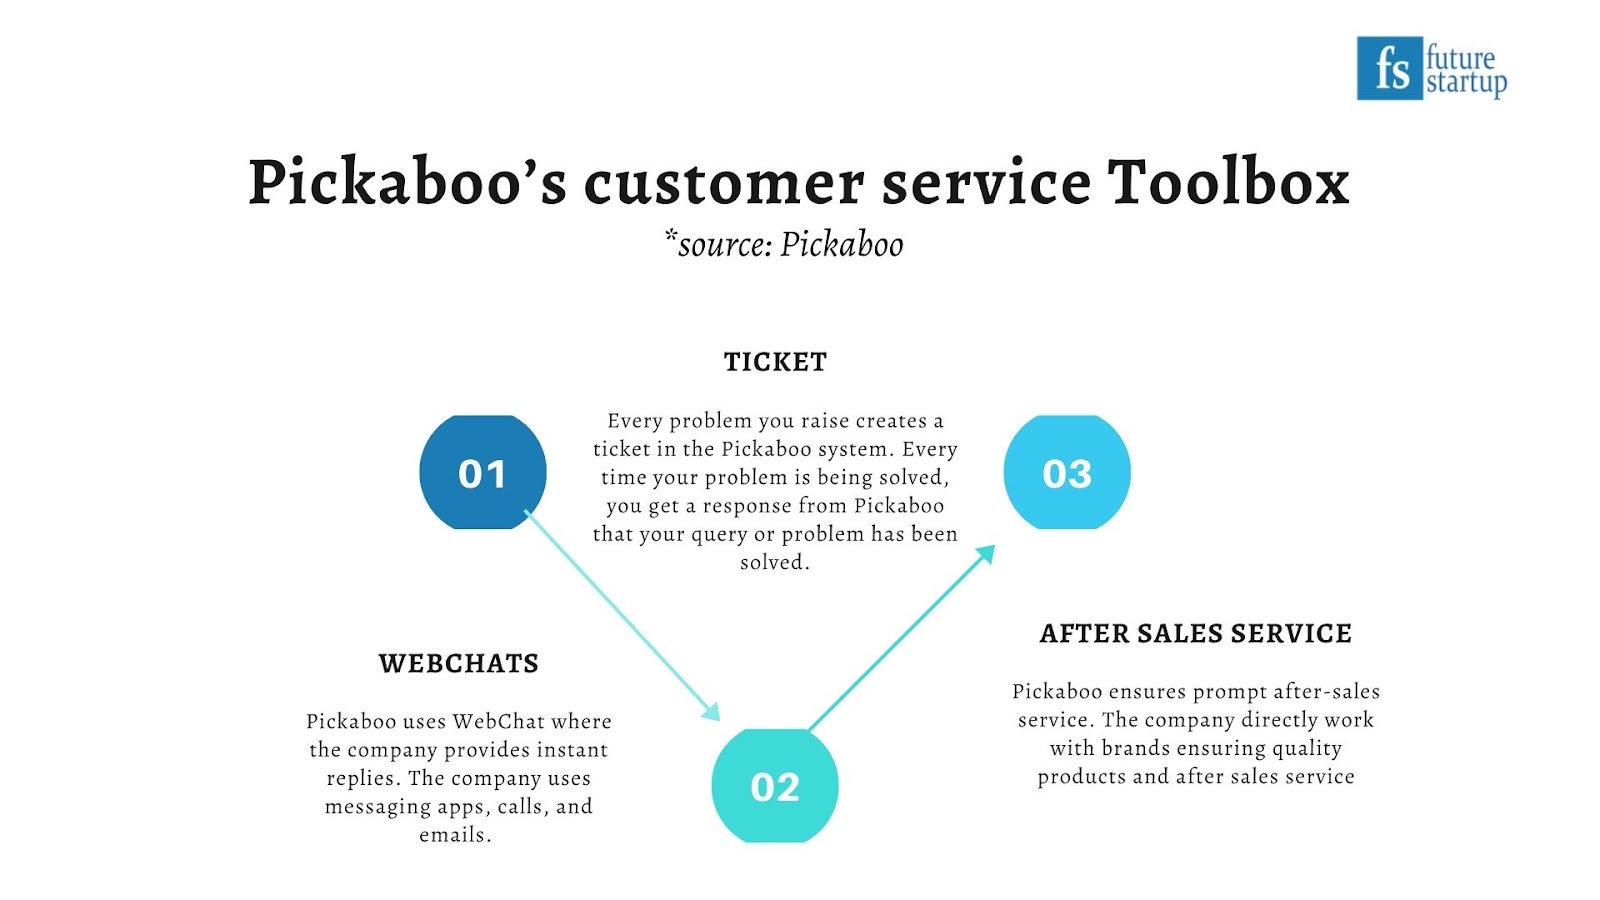 Pickaboo Takes a Different Approach to Growth, Focuses on Customer Service and Trust Building